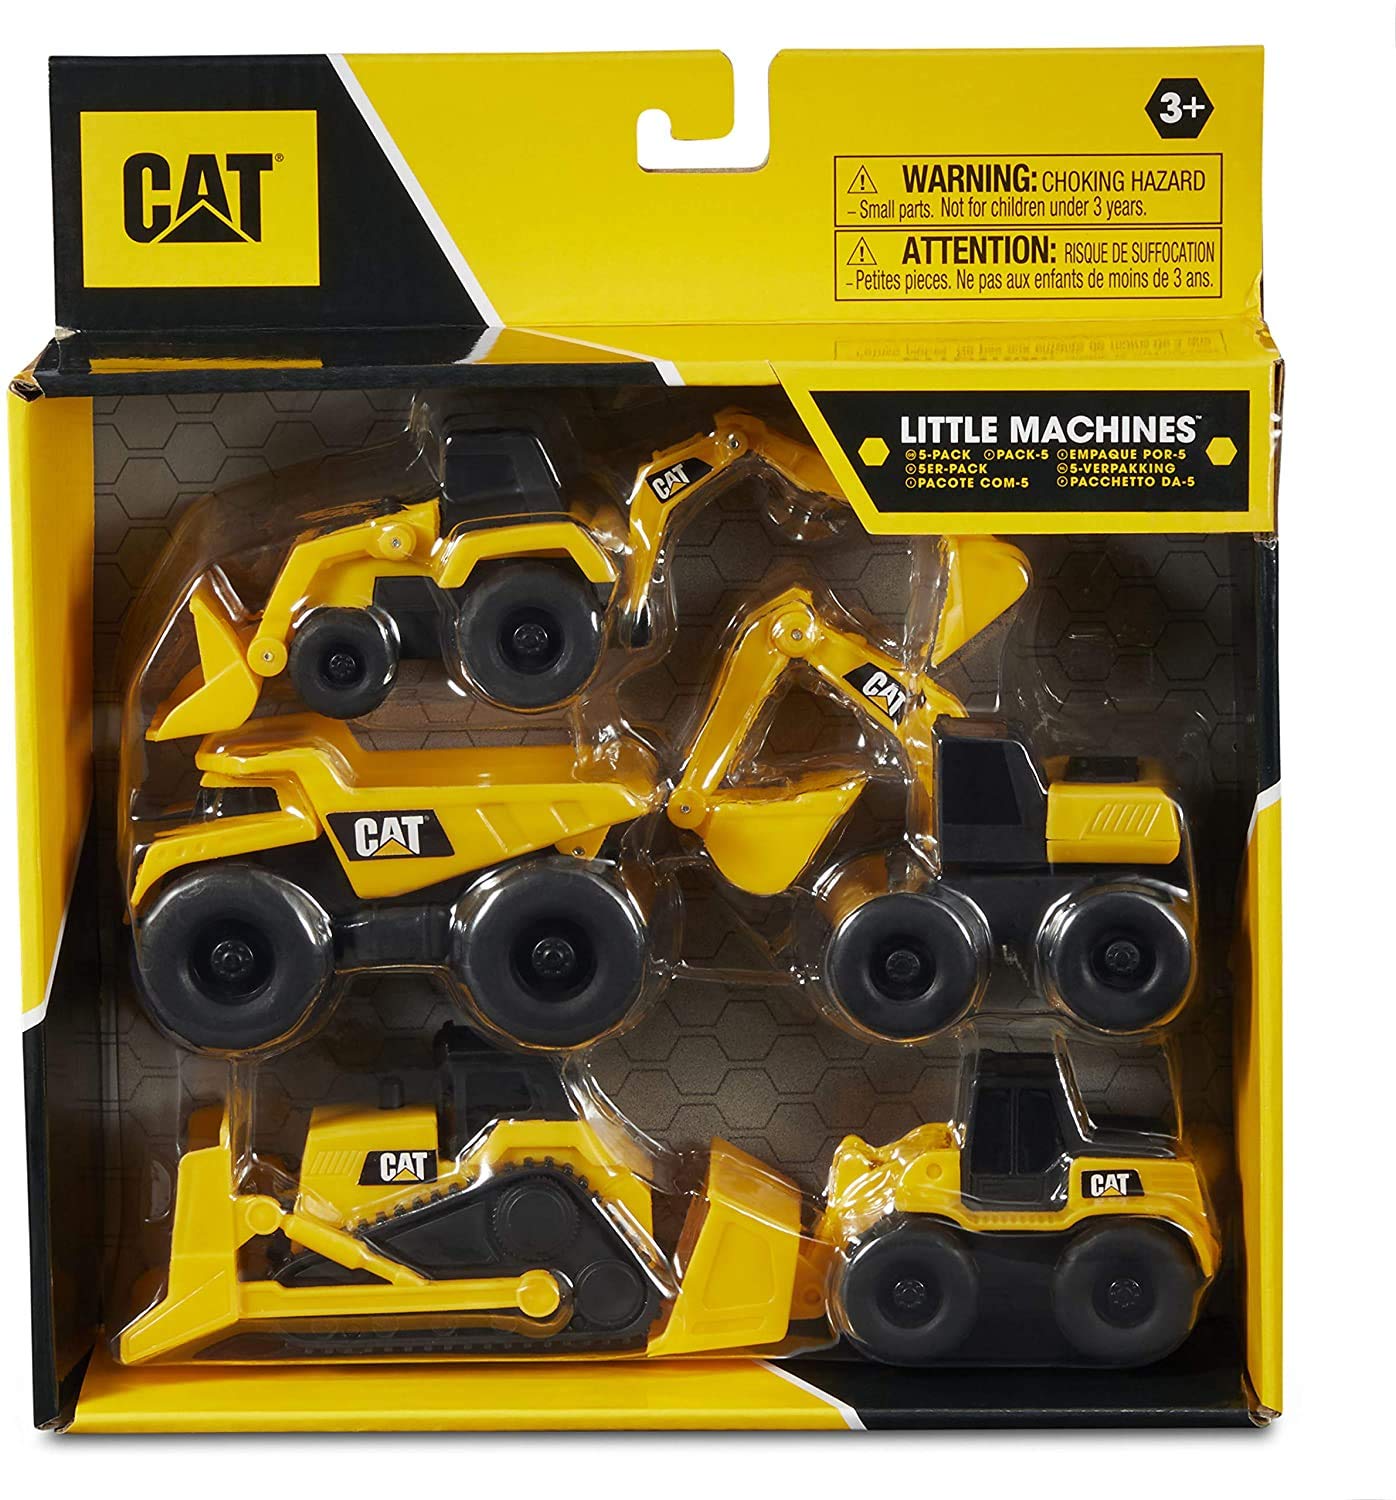 Caterpillar CAT Mini Machine Construction Truck Toy Cars Set of 5, Dump Truck, Bulldozer, Wheel Loader, Excavator and Backhoe Free-Wheeling Vehicles w/Moving Parts -Great Cake Toppers